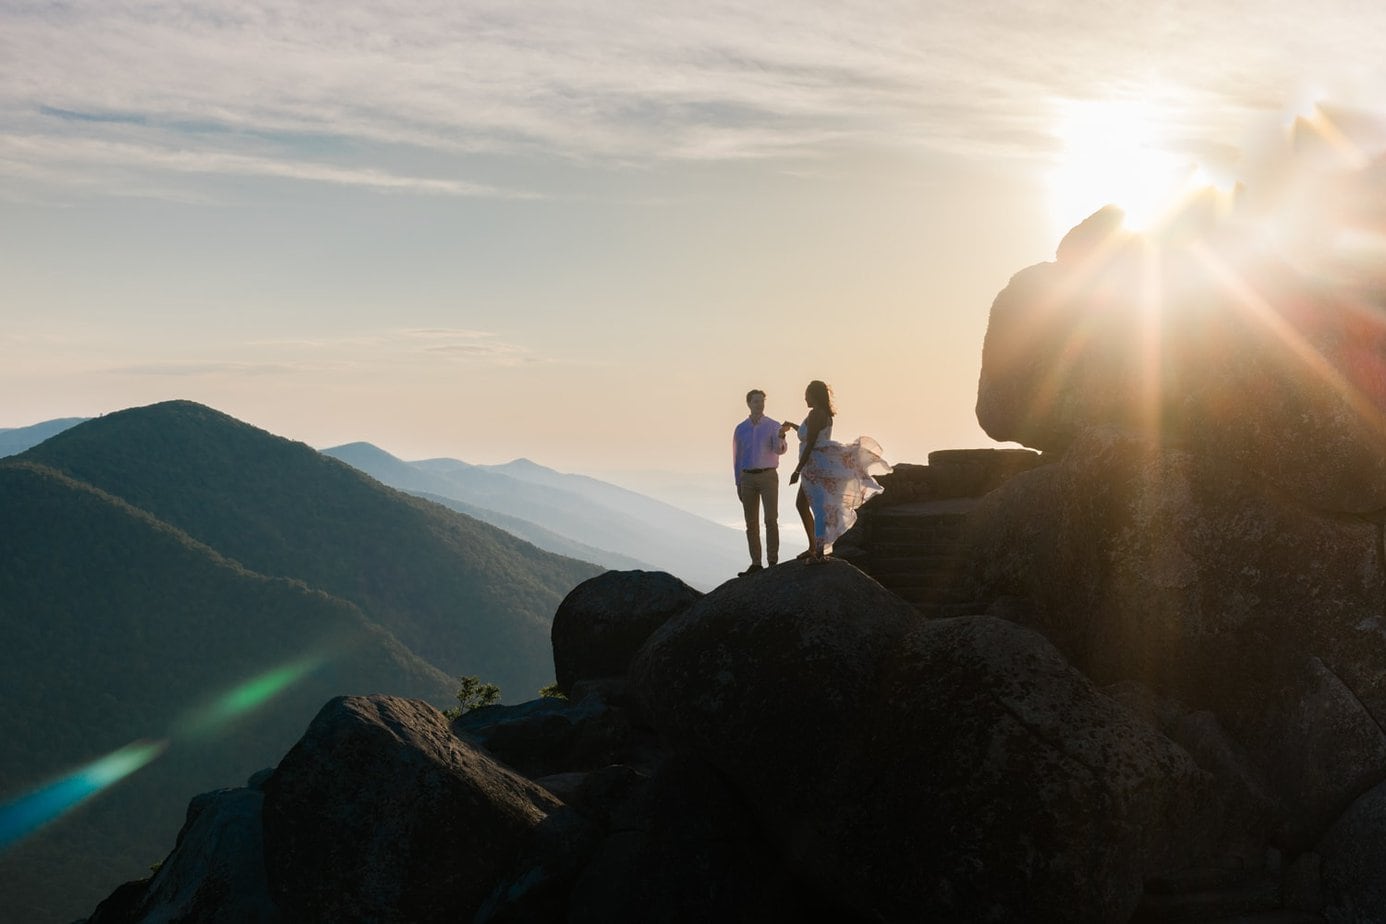 A man and woman stand silhouetted on a dramatic mountain landscape